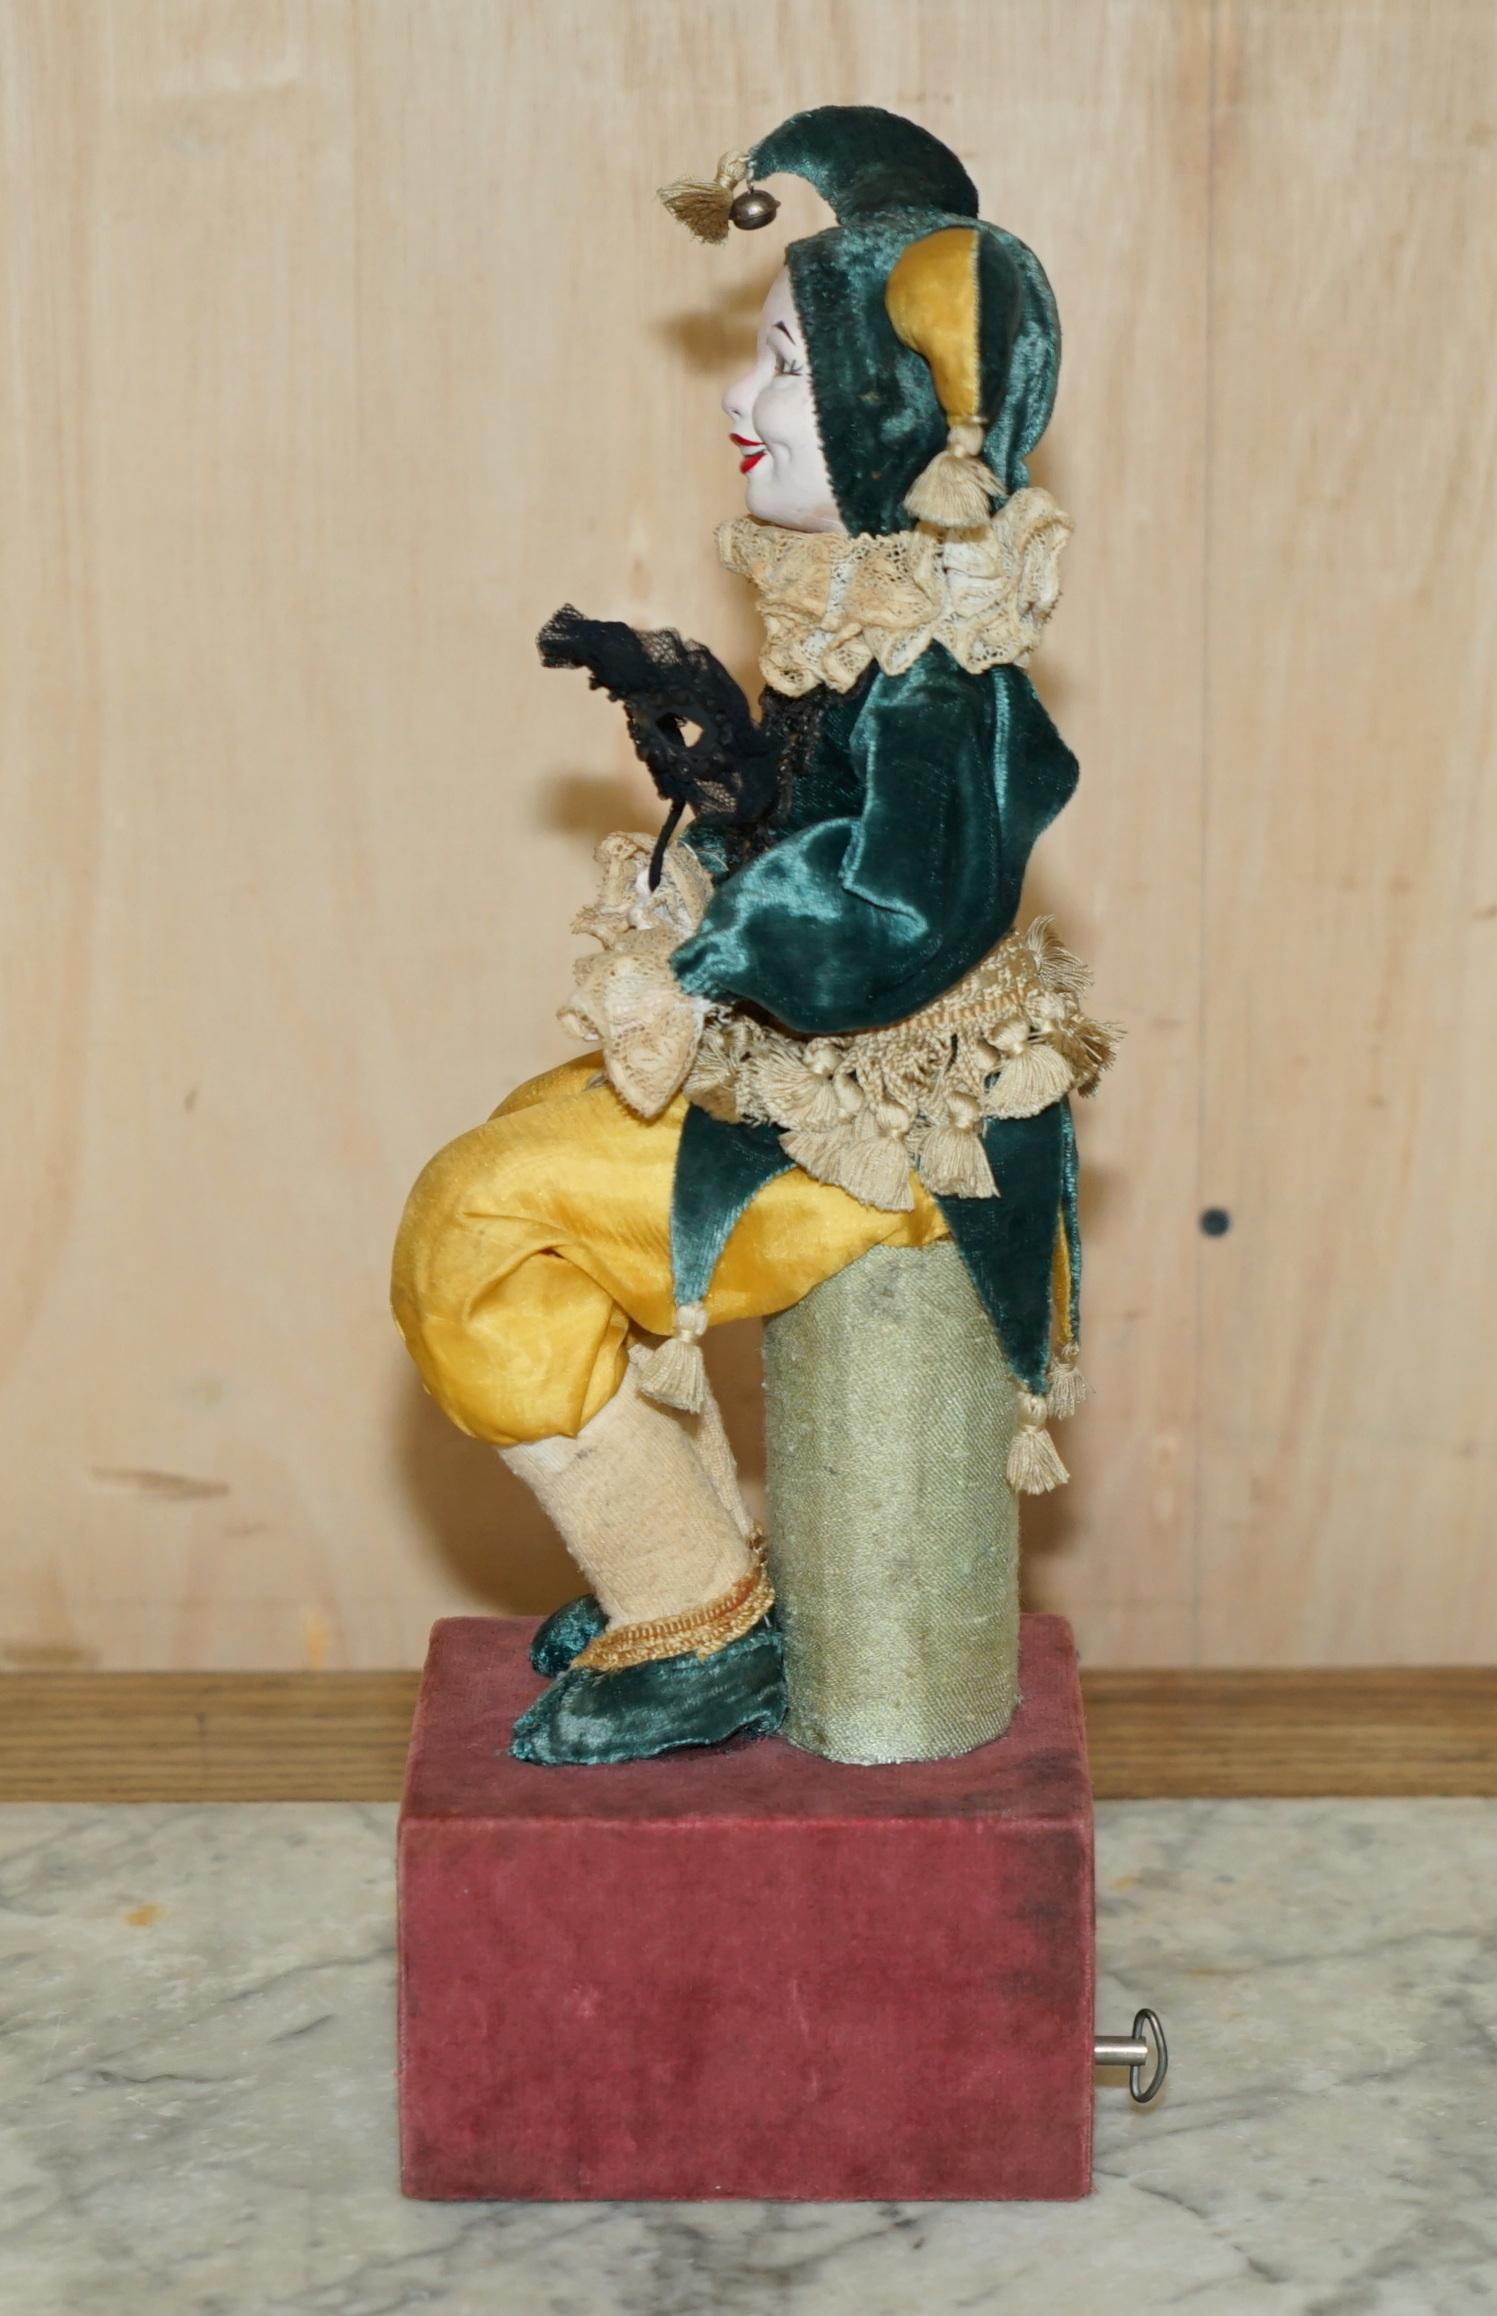 ANTiQUE FRENCH HAND MADE MUSICAL AUTOMATON JESTER CLOWN THAT PLAYS MUSIC & MOVES For Sale 5